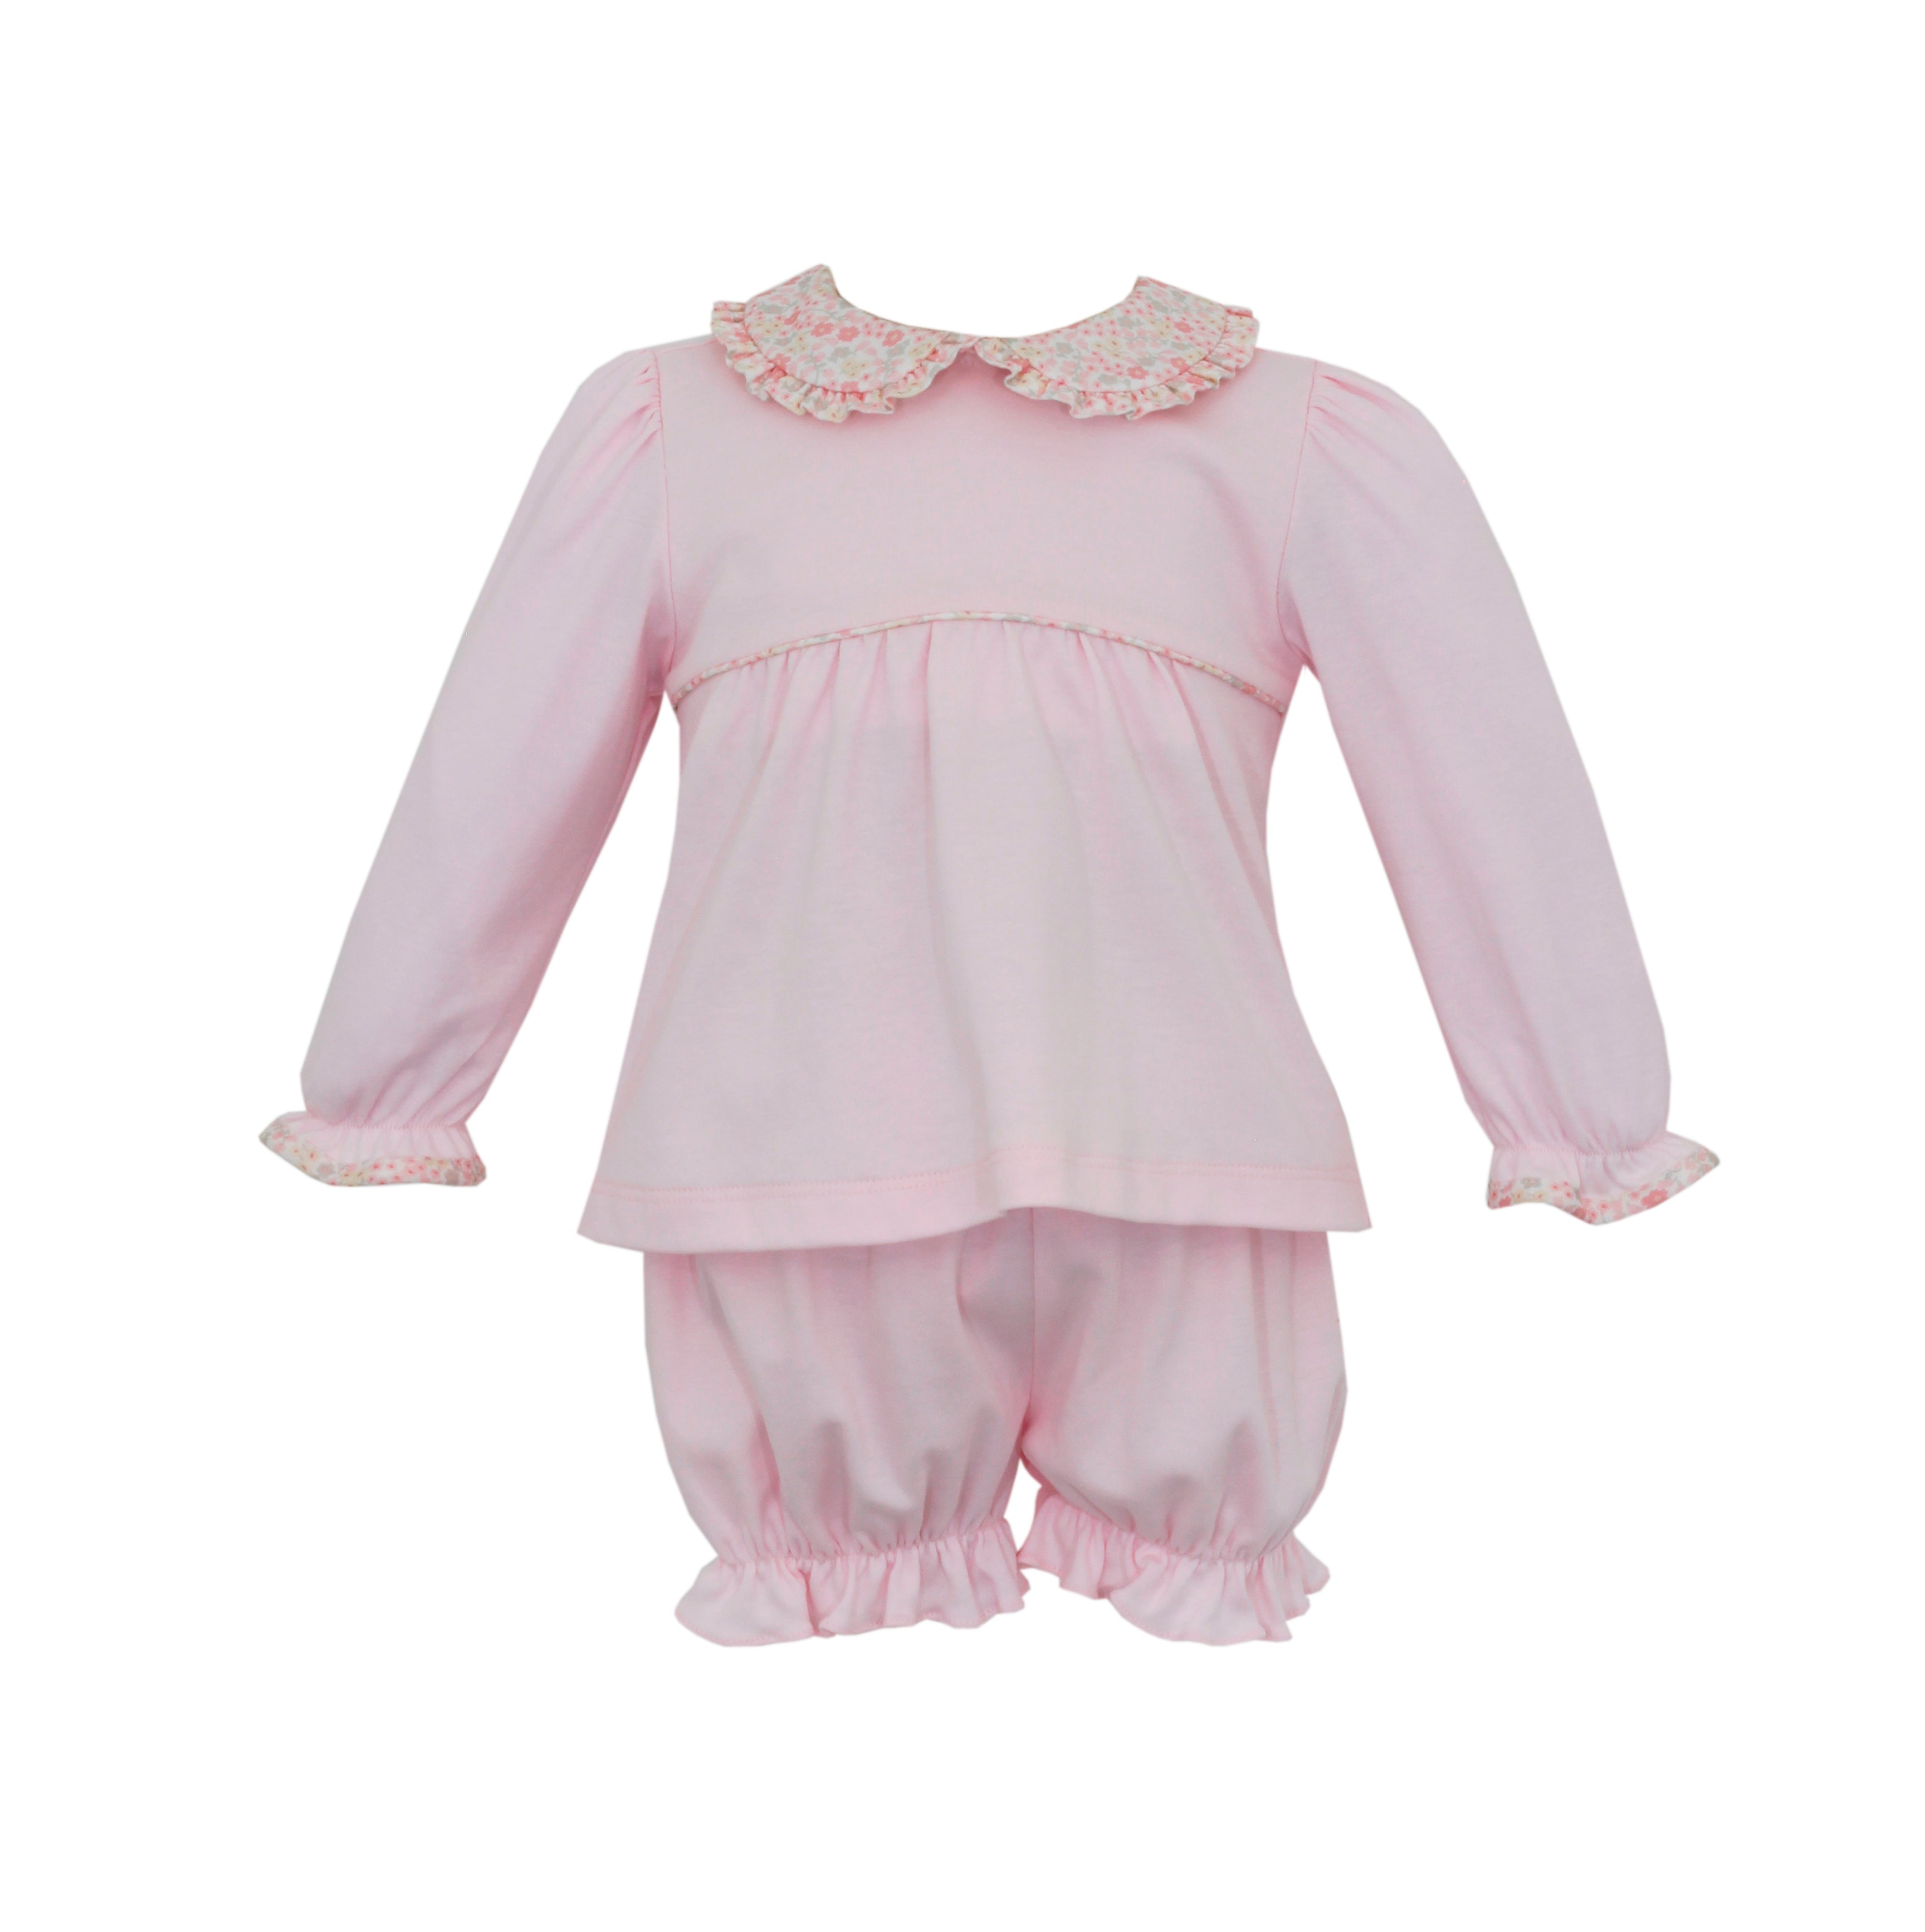 Pink Knit Bloomer Set With Liberty Floral Trim (Baby)